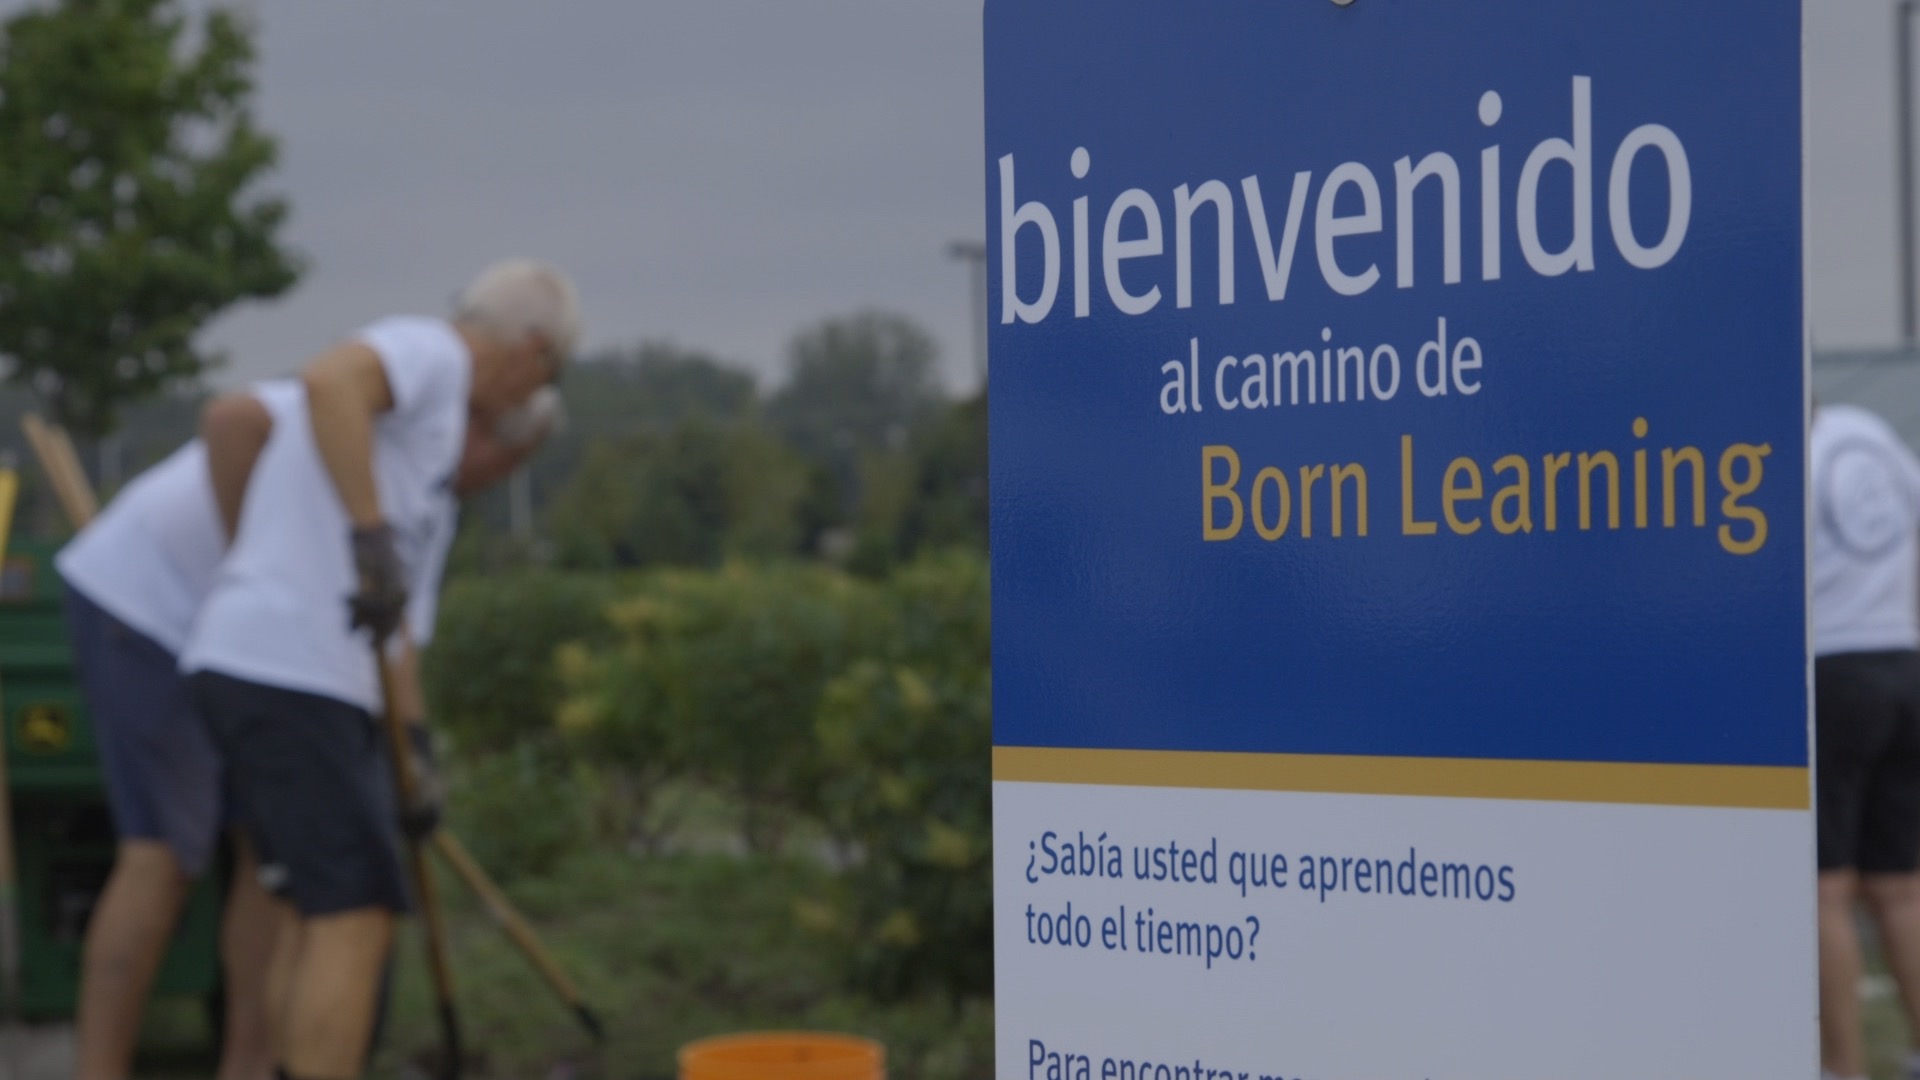 Bienvendido al camino de Born Learning Trail. You will also see two men raking in the background.